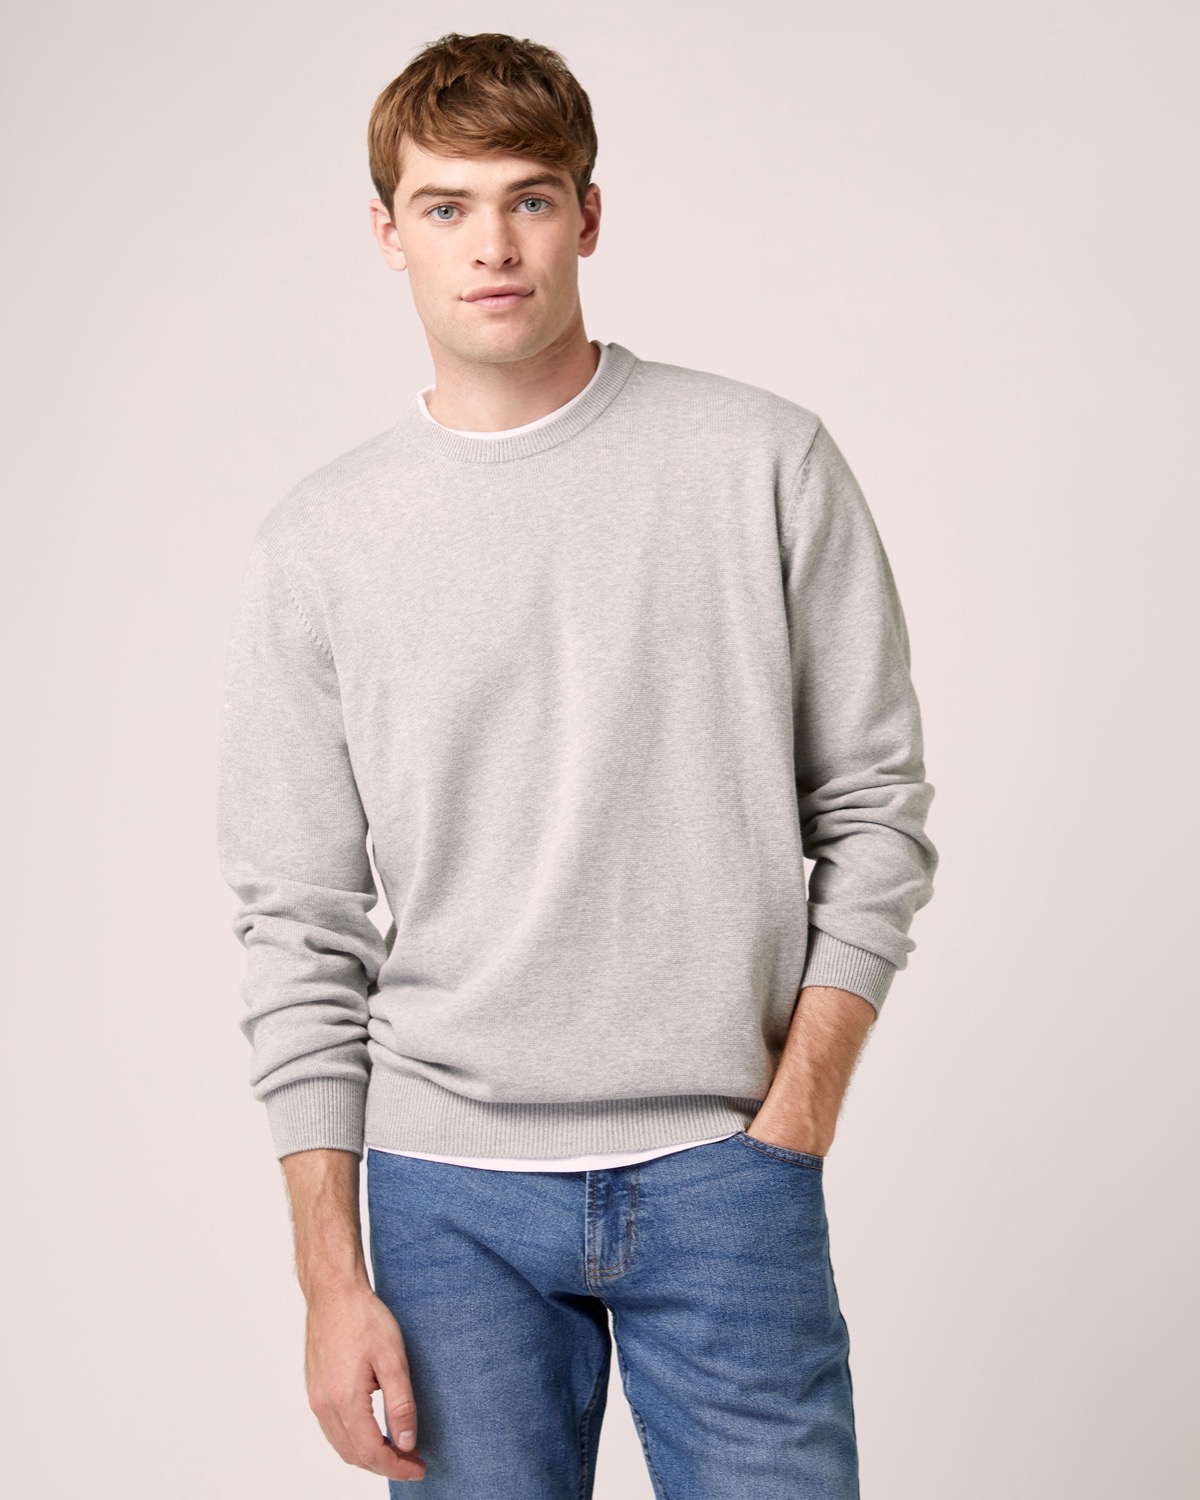 https://dunnes.btxmedia.com/pws/client/images/catalogue/products/4654281/zoom/4654281_grey.jpg